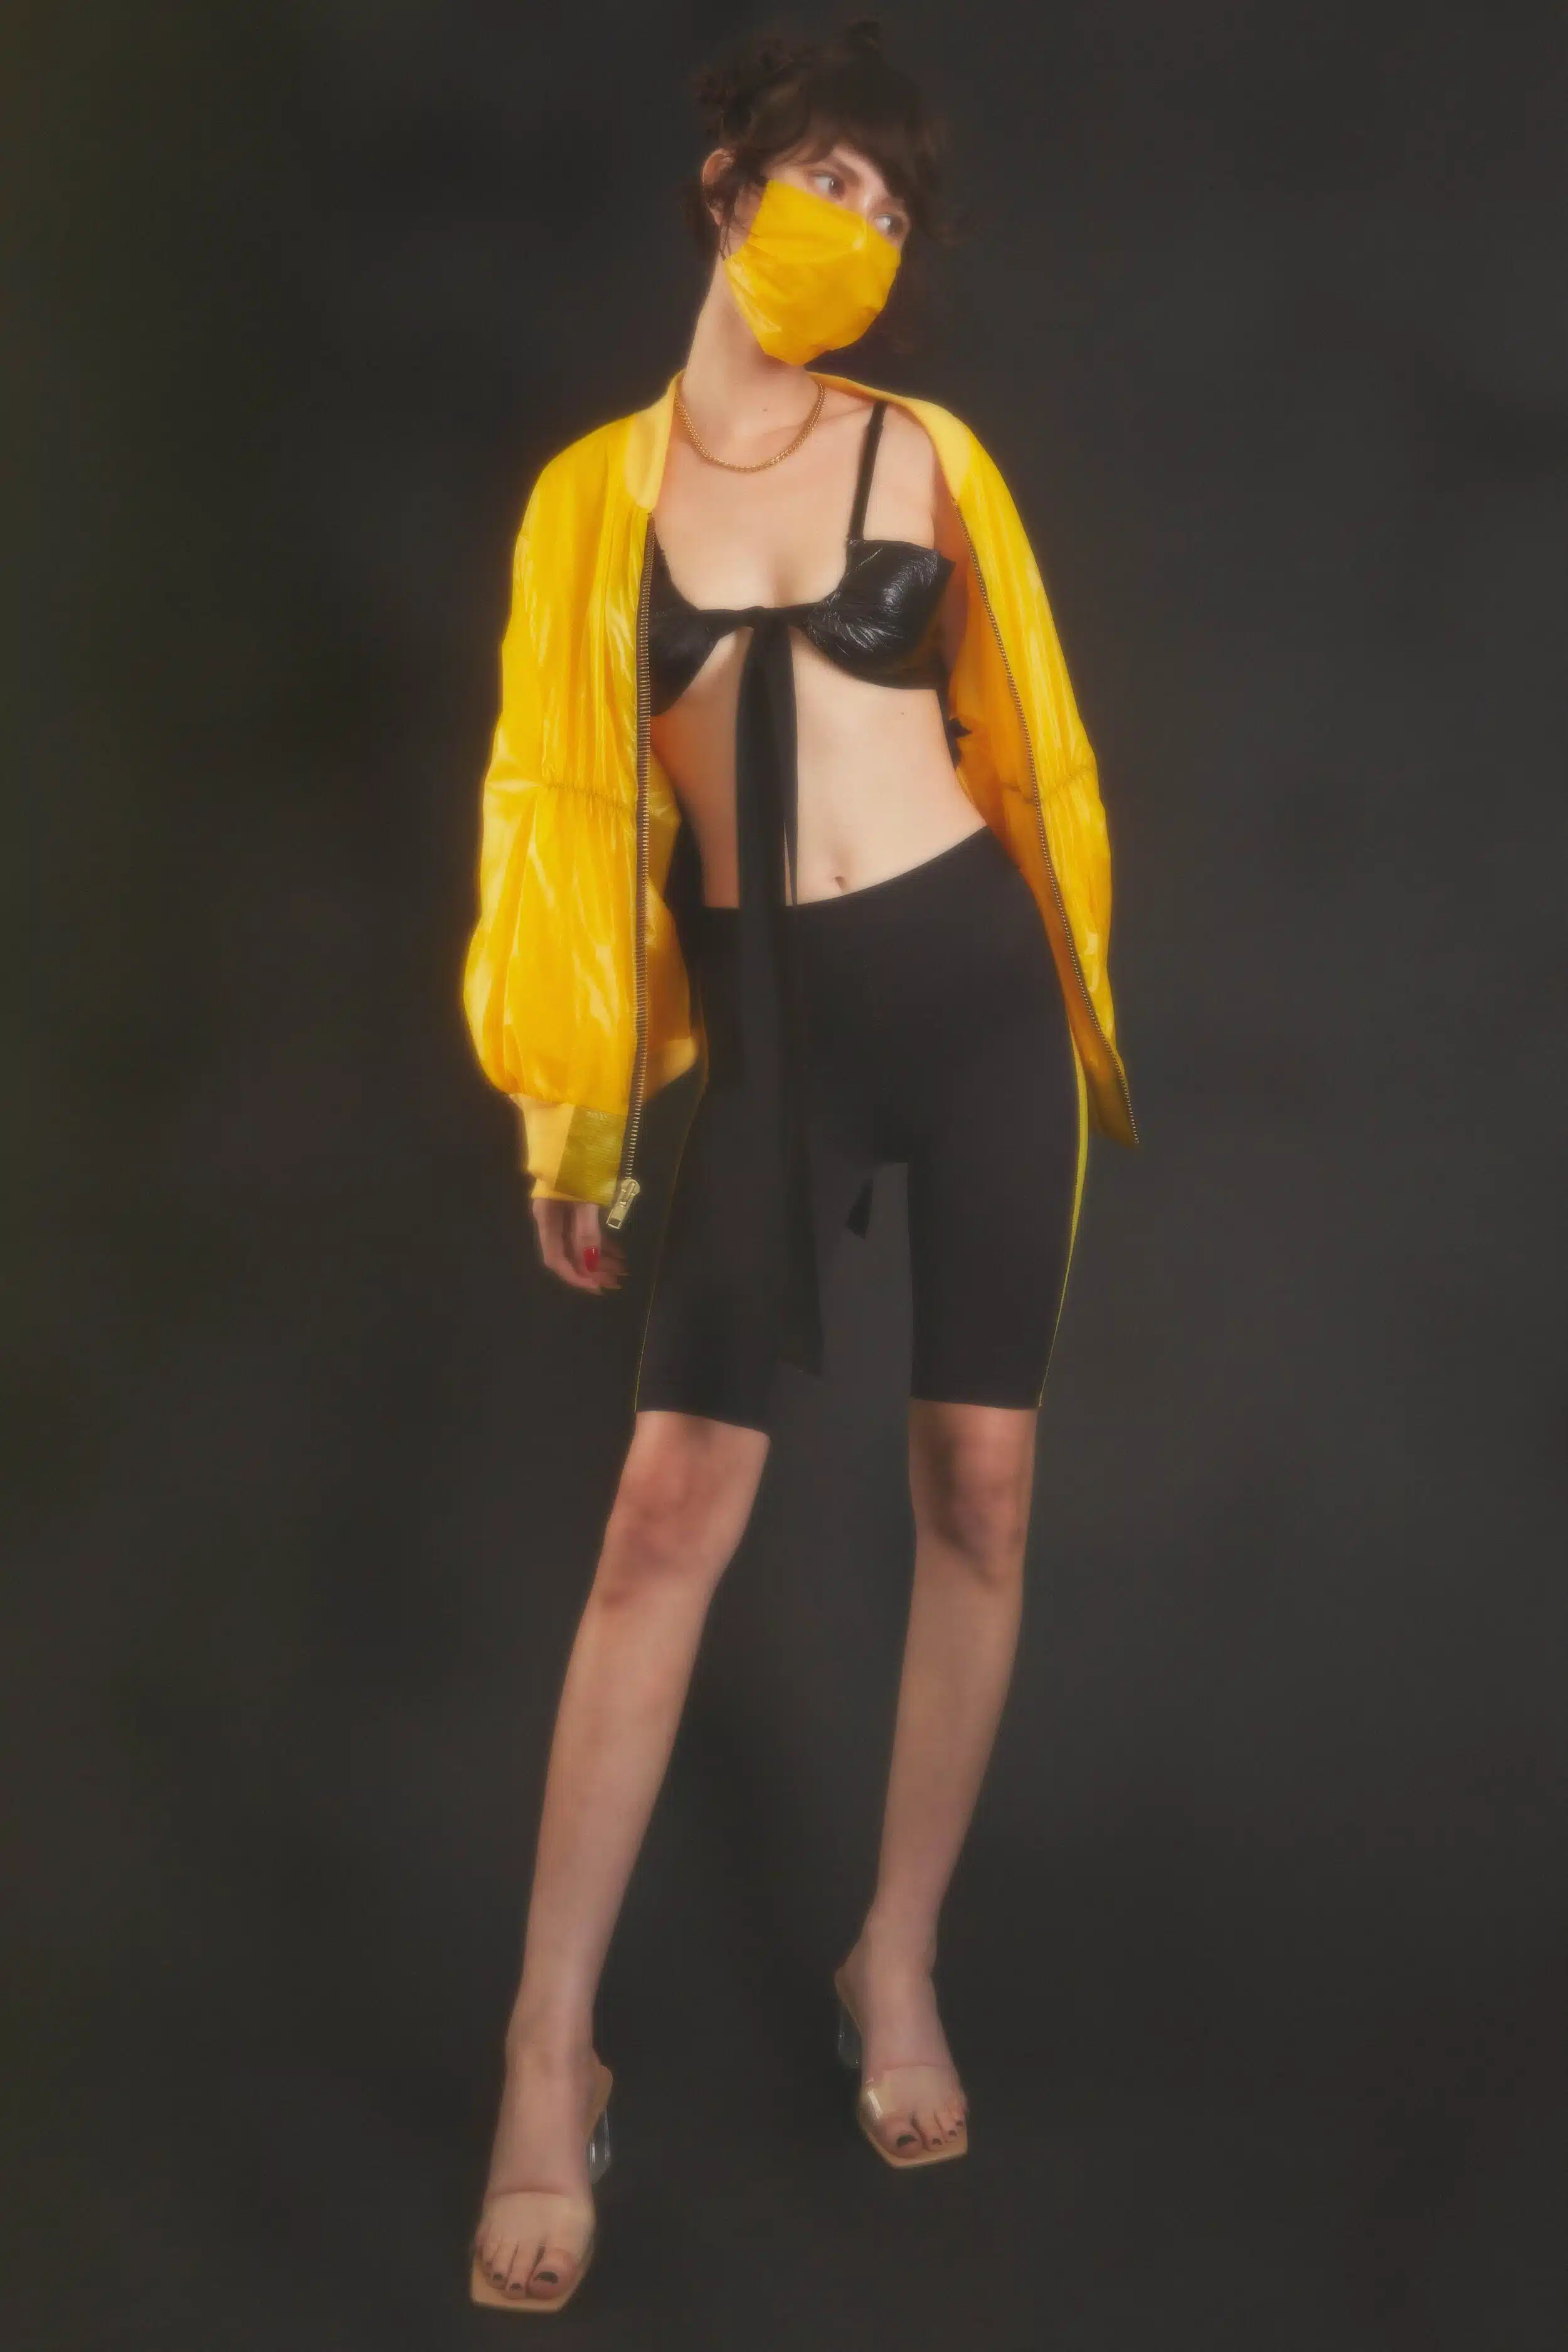 Image from SS21 Collection